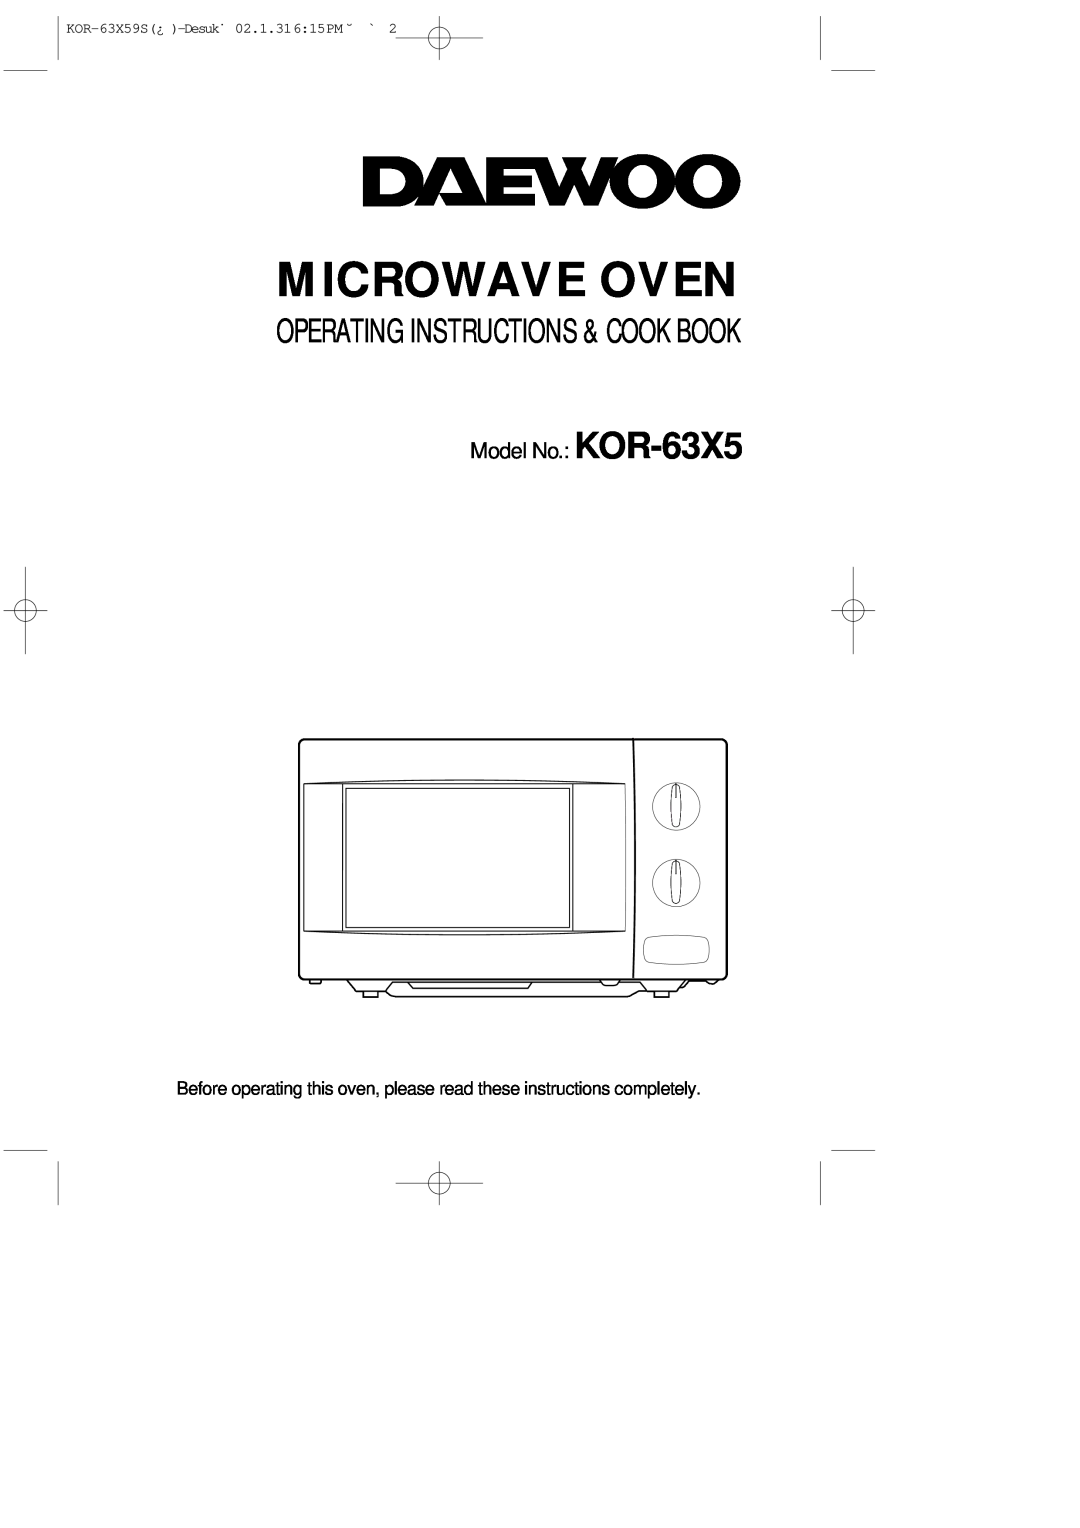 Daewoo operating instructions Microwave Oven, Operating Instructions & Cook Book, Model No.: KOR-63X5 